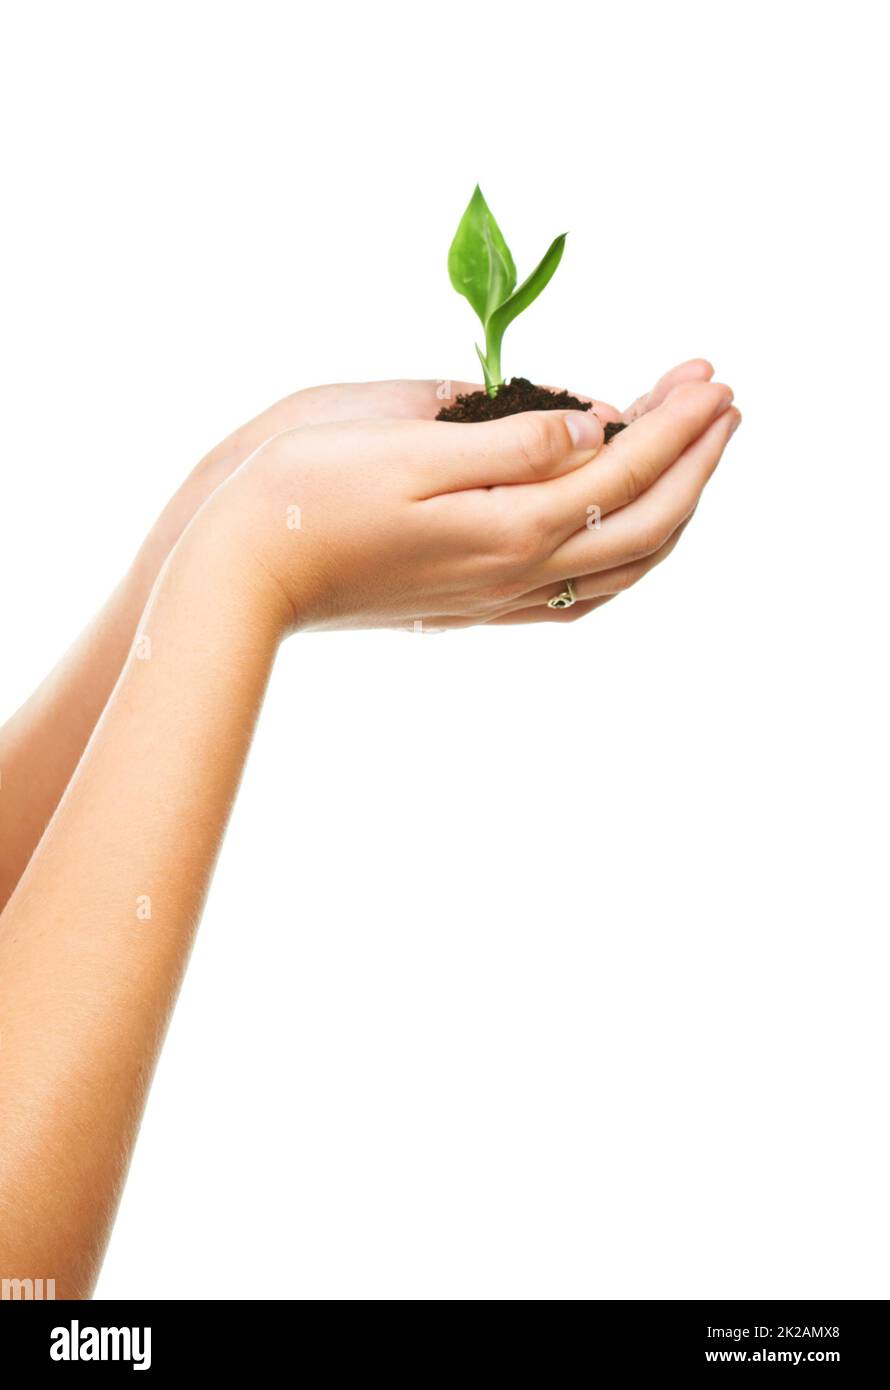 Nurturing hands. Closeup shot of cupped hand holding a small seedling. Stock Photo